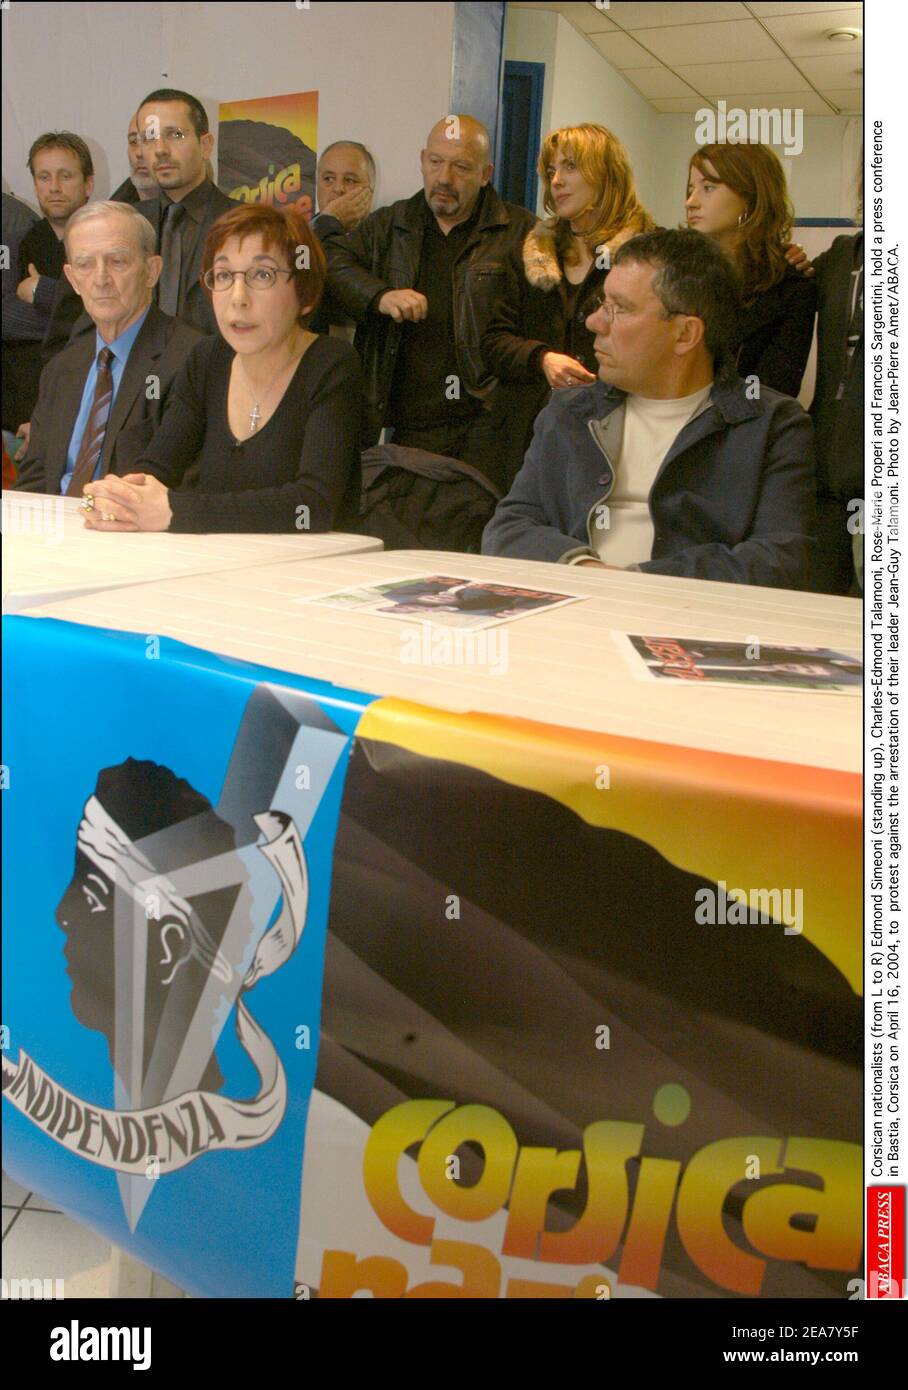 Corsican nationalists (from L to R) Edmond Simeoni (standing up), Charles-Edmond Talamoni, Rose-Marie Properi and Francois Sargentini, hold a press conference in Bastia, Corsica on April 16, 2004, to protest against the arrestation of their leader Jean-Guy Talamoni. Photo by Jean-Pierre Amet/ABACA. Stock Photo